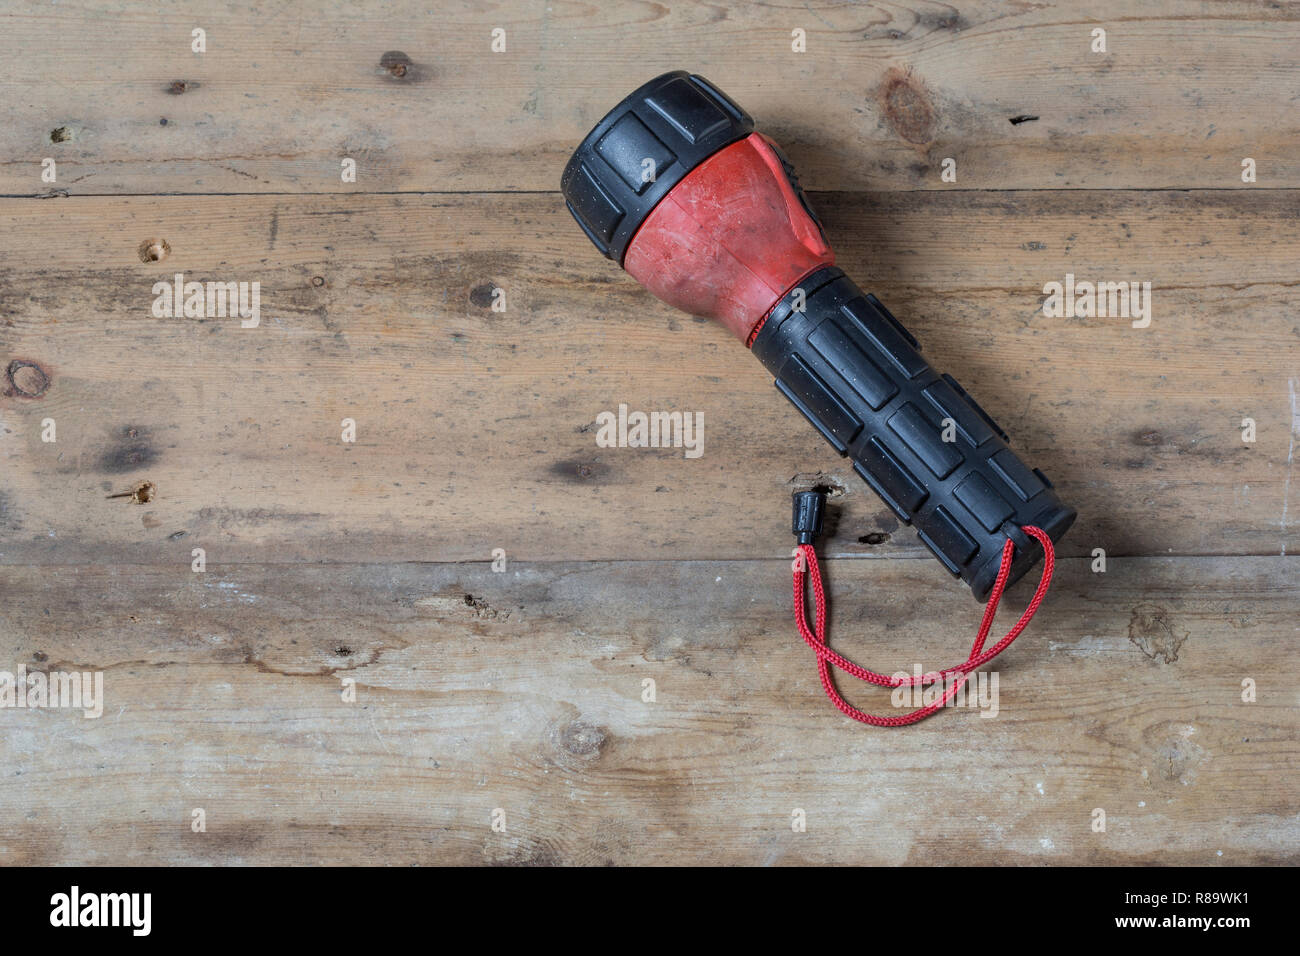 https://c8.alamy.com/comp/R89WK1/an-old-red-and-black-rubber-torch-R89WK1.jpg